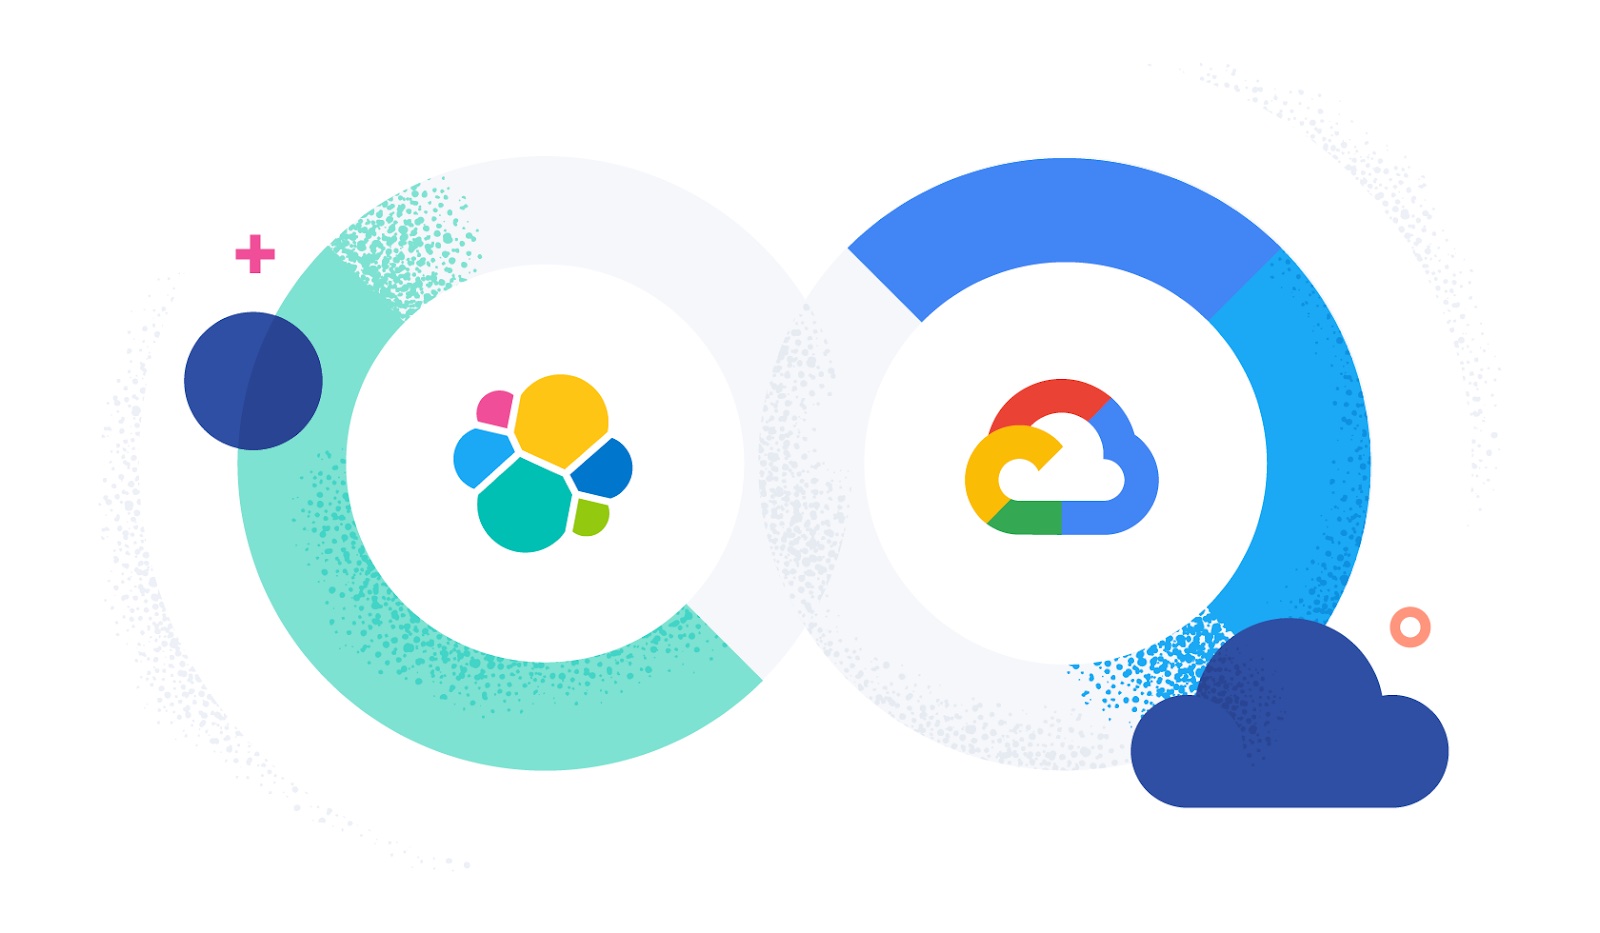 Elastic and Google Cloud collaborate on generative AI and security as a part of an expanded partnership